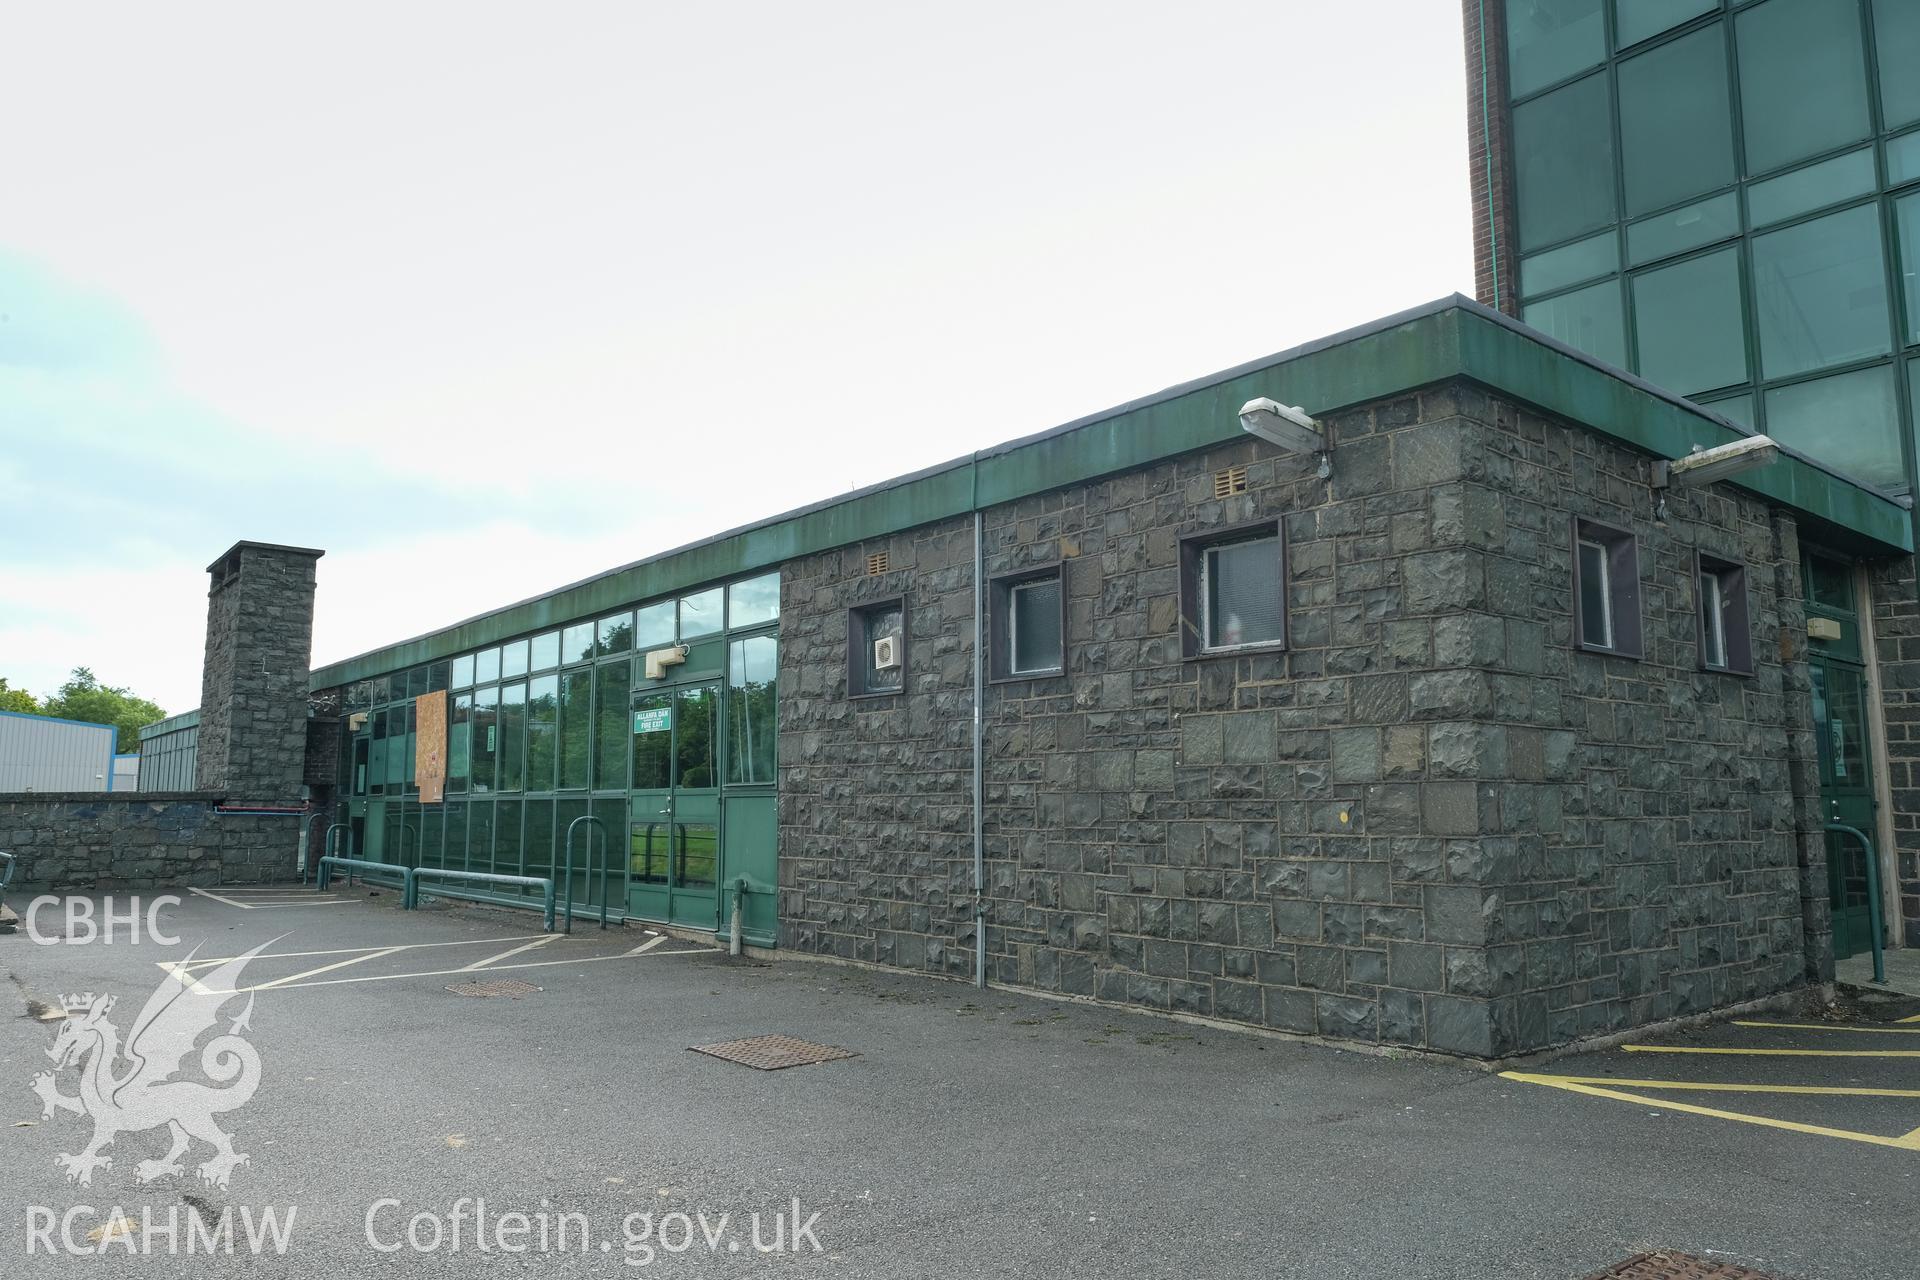 Digital colour photograph showing exterior view of a heavily fenestrated and stone wall at Caernarfonshire Technical College, Bangor. Photographed by Dilys Morgan and donated by Wyn Thomas of Grwp Llandrillo-Menai Further Education College, 2019.